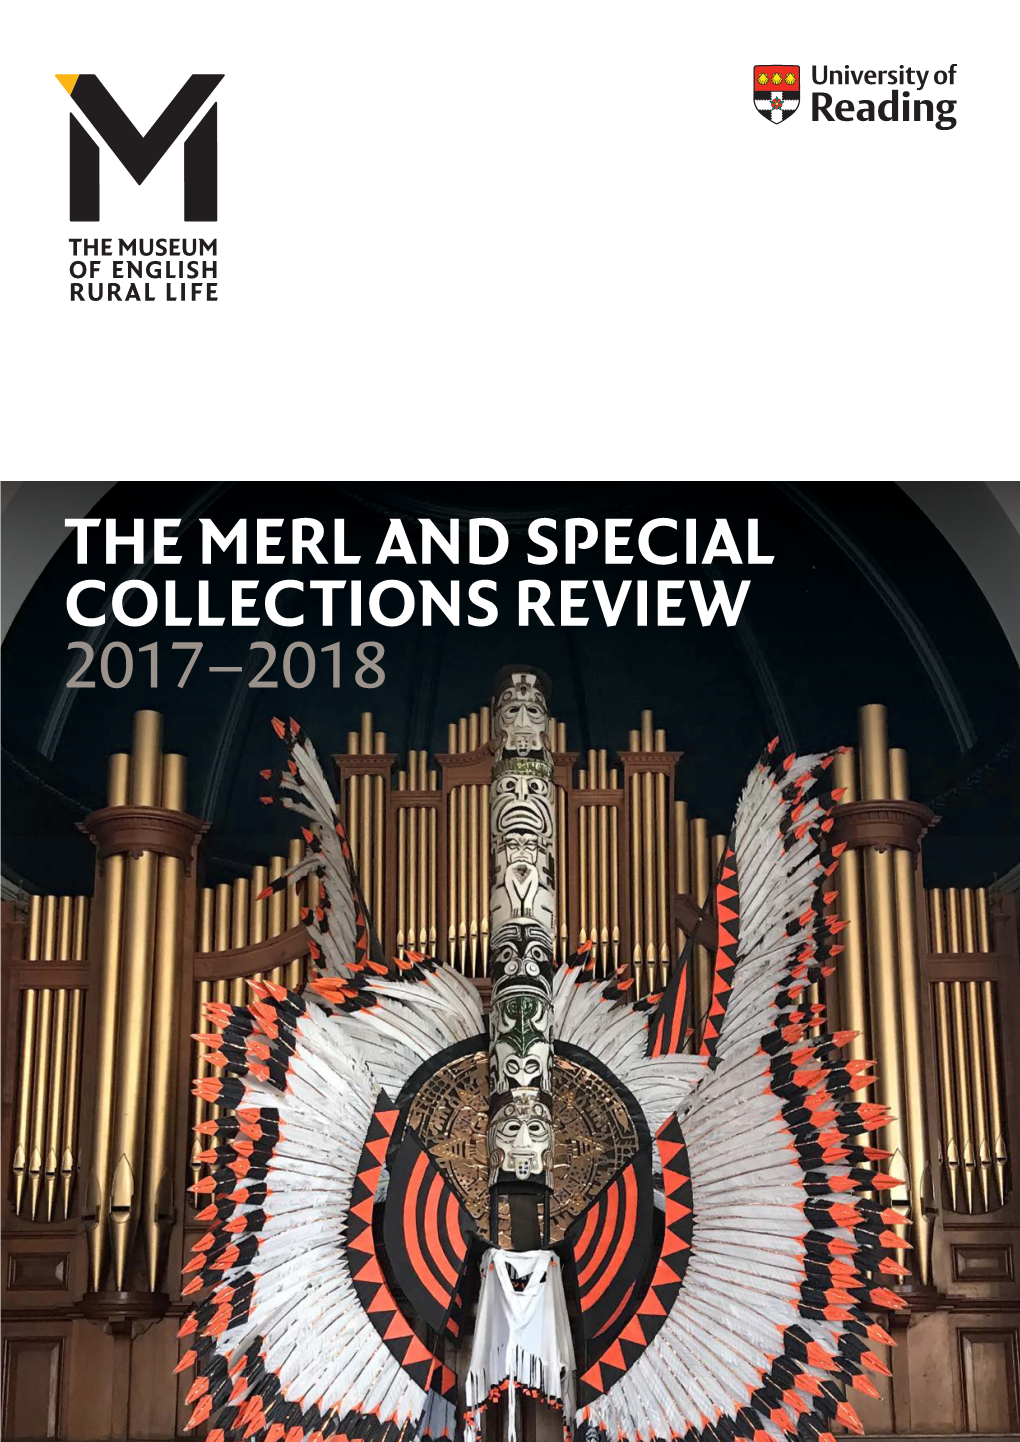 The Merl and Special Collections Review 2017 – 2018 Contents